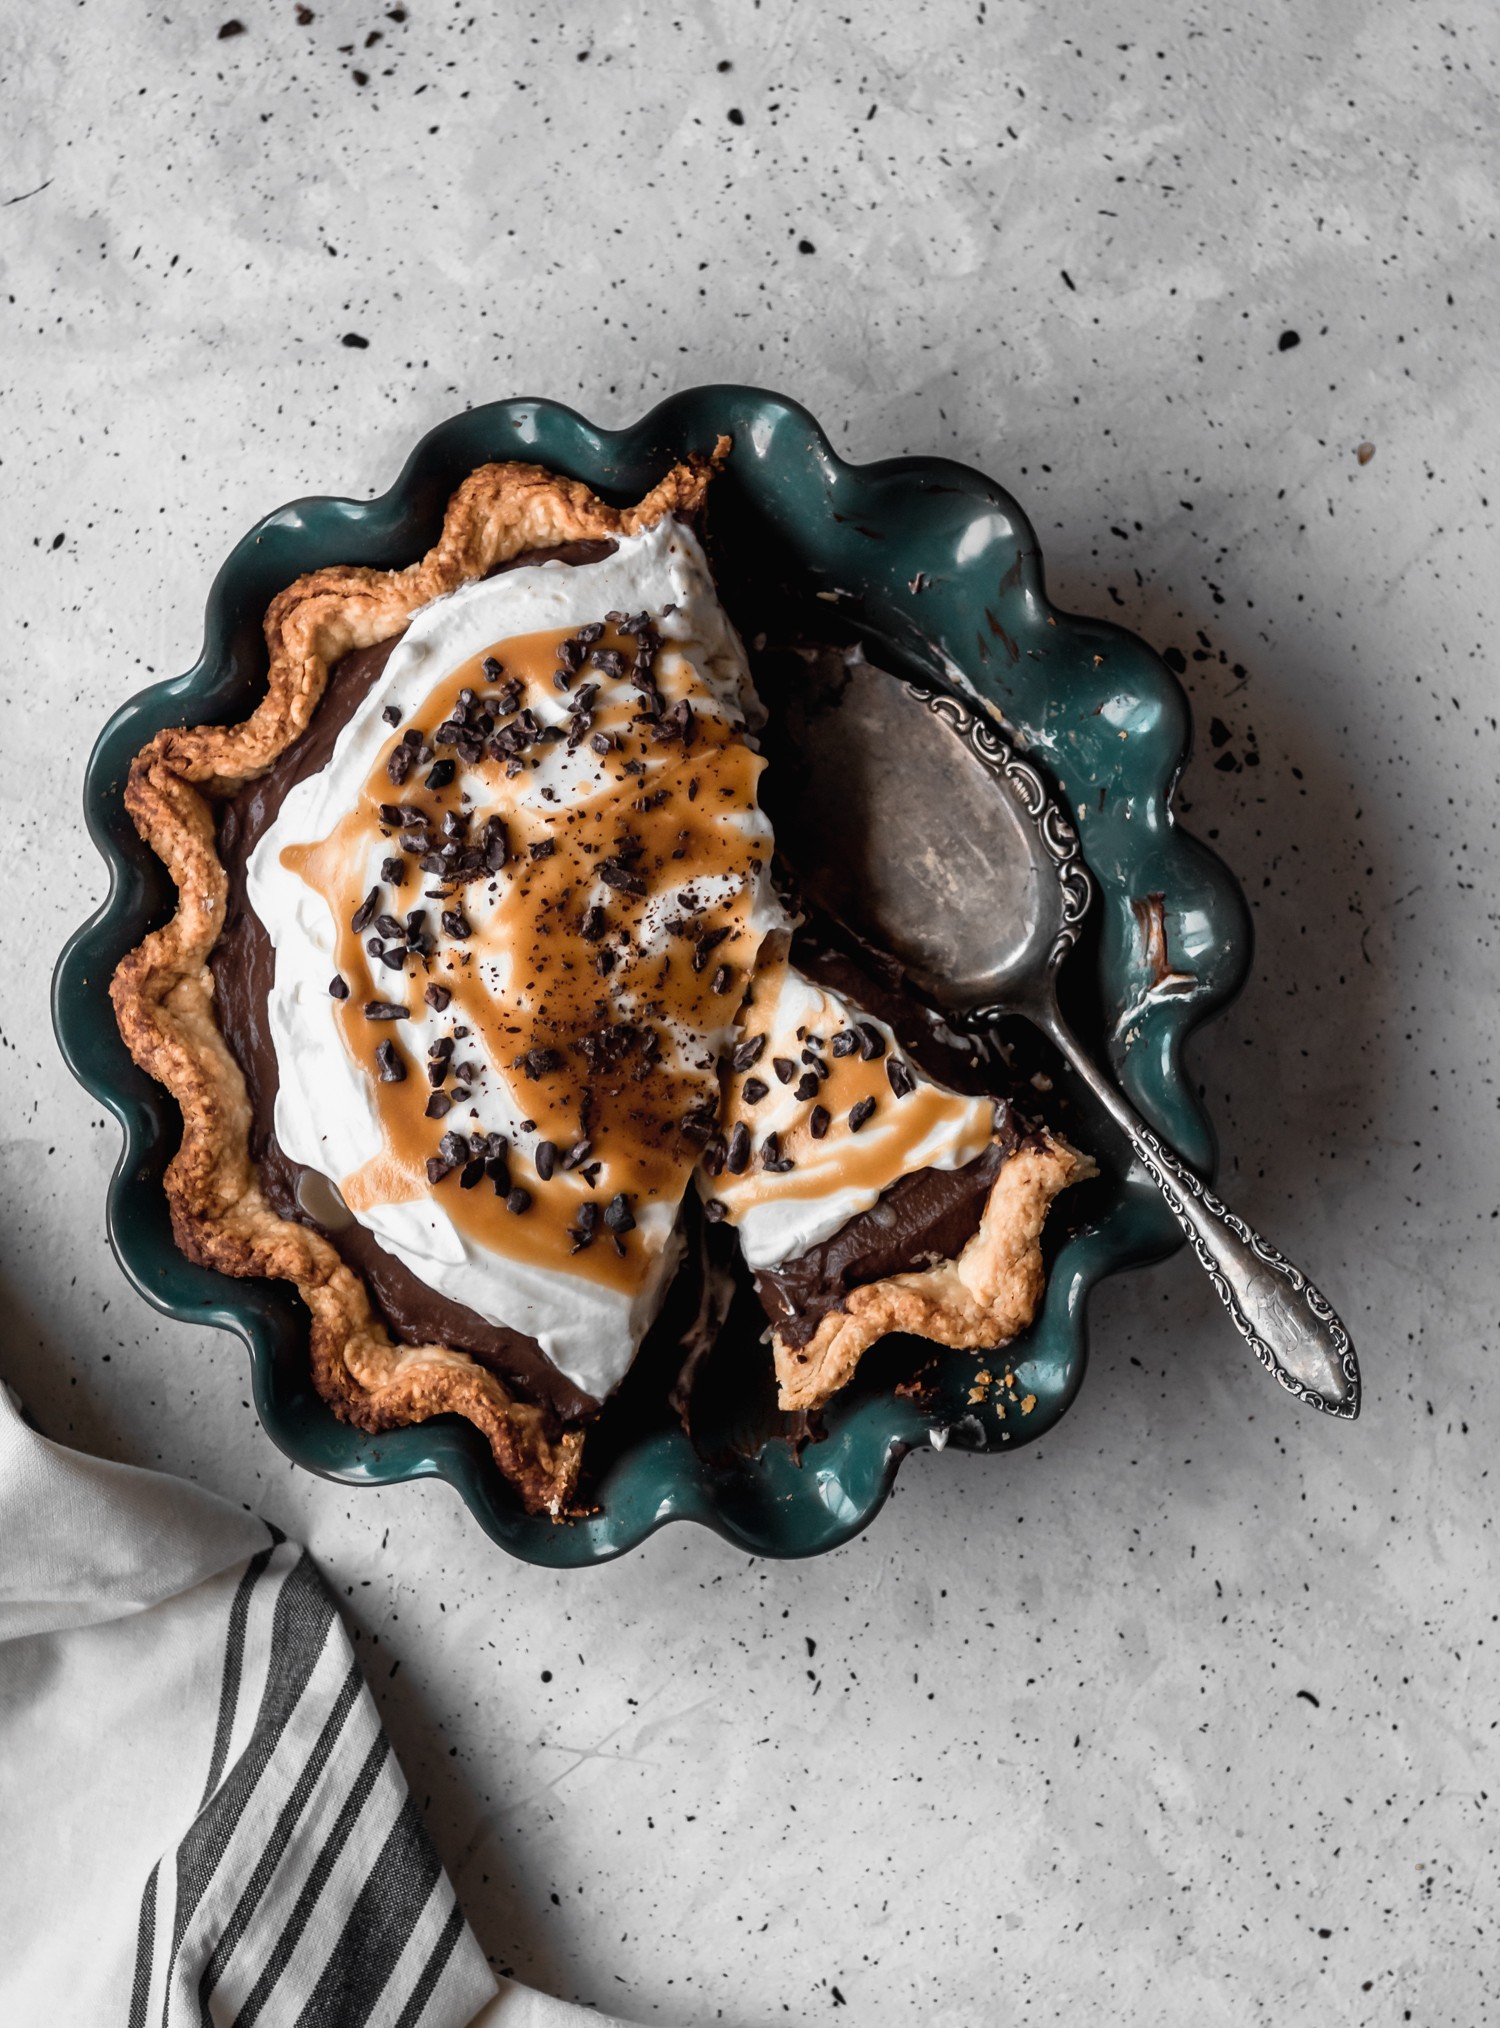 An overhead image of a chocolate cream pie in a dark green pie plate on a speckled grey table. The pie is sliced and there is a vintage pie server in the plate. The dish is next to a striped linen.